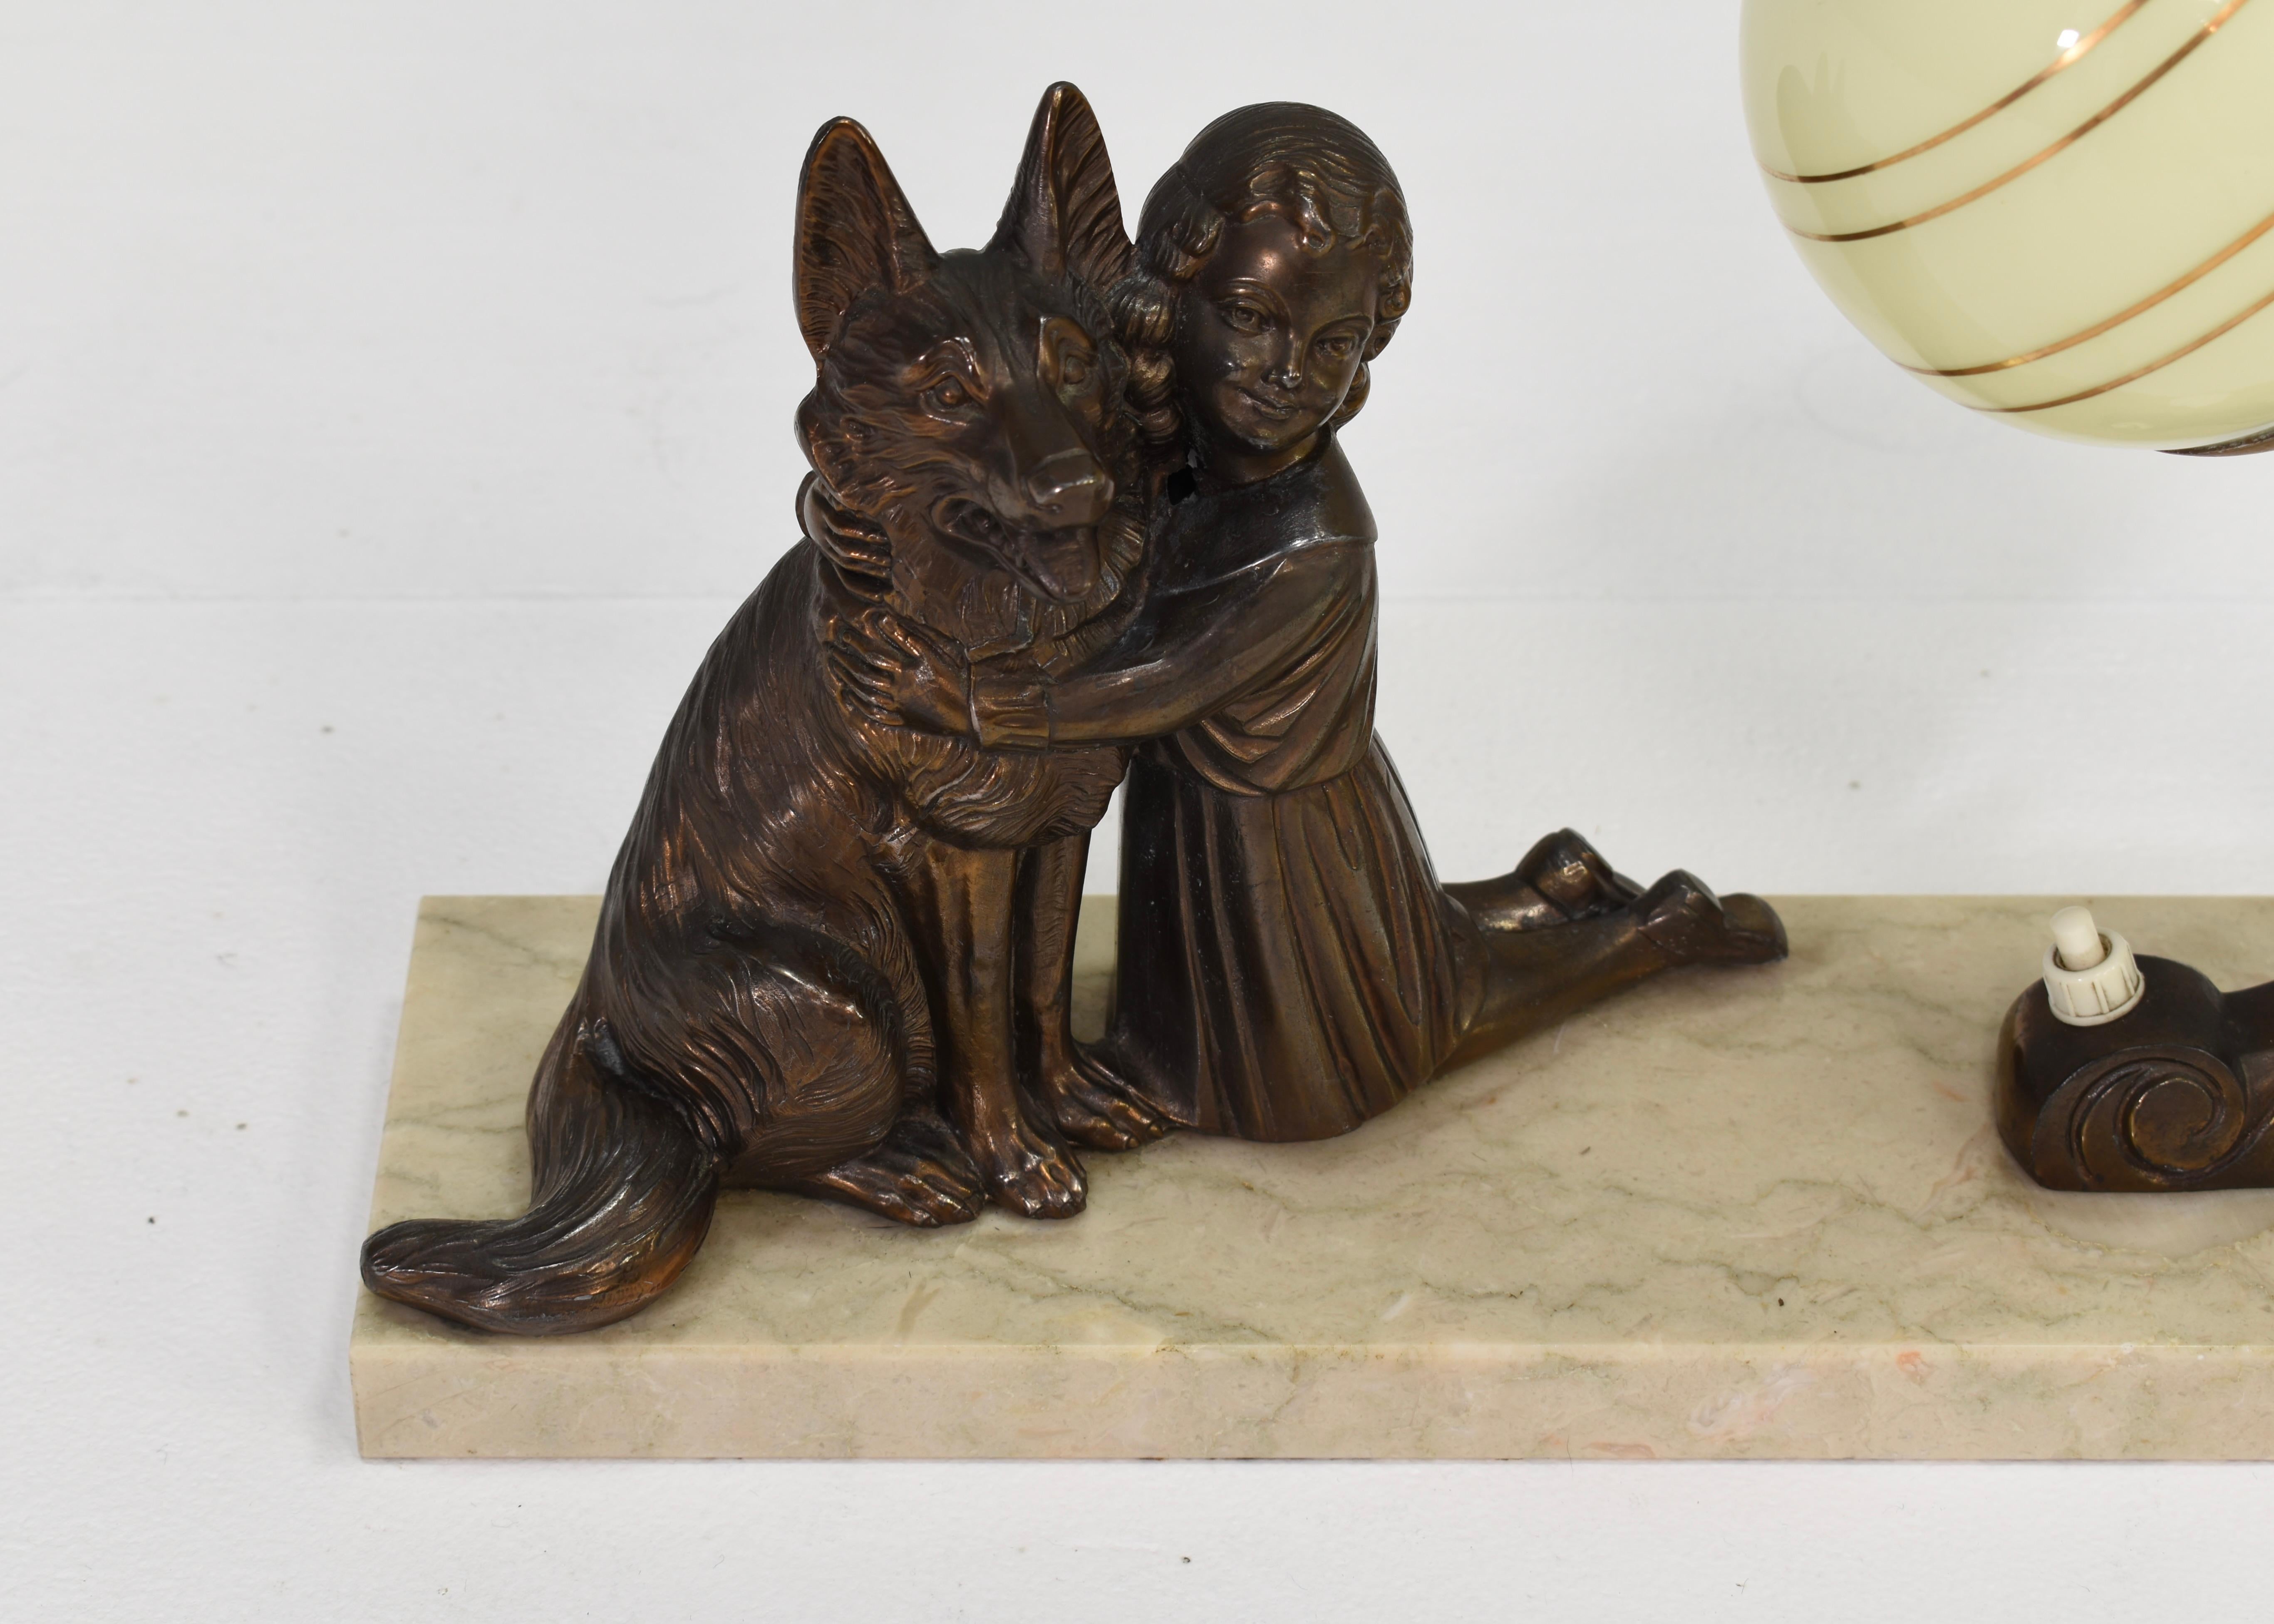 French Art Deco Desk Table Lamp Girl and German Shepherd Sculpture, circa 1930 For Sale 2